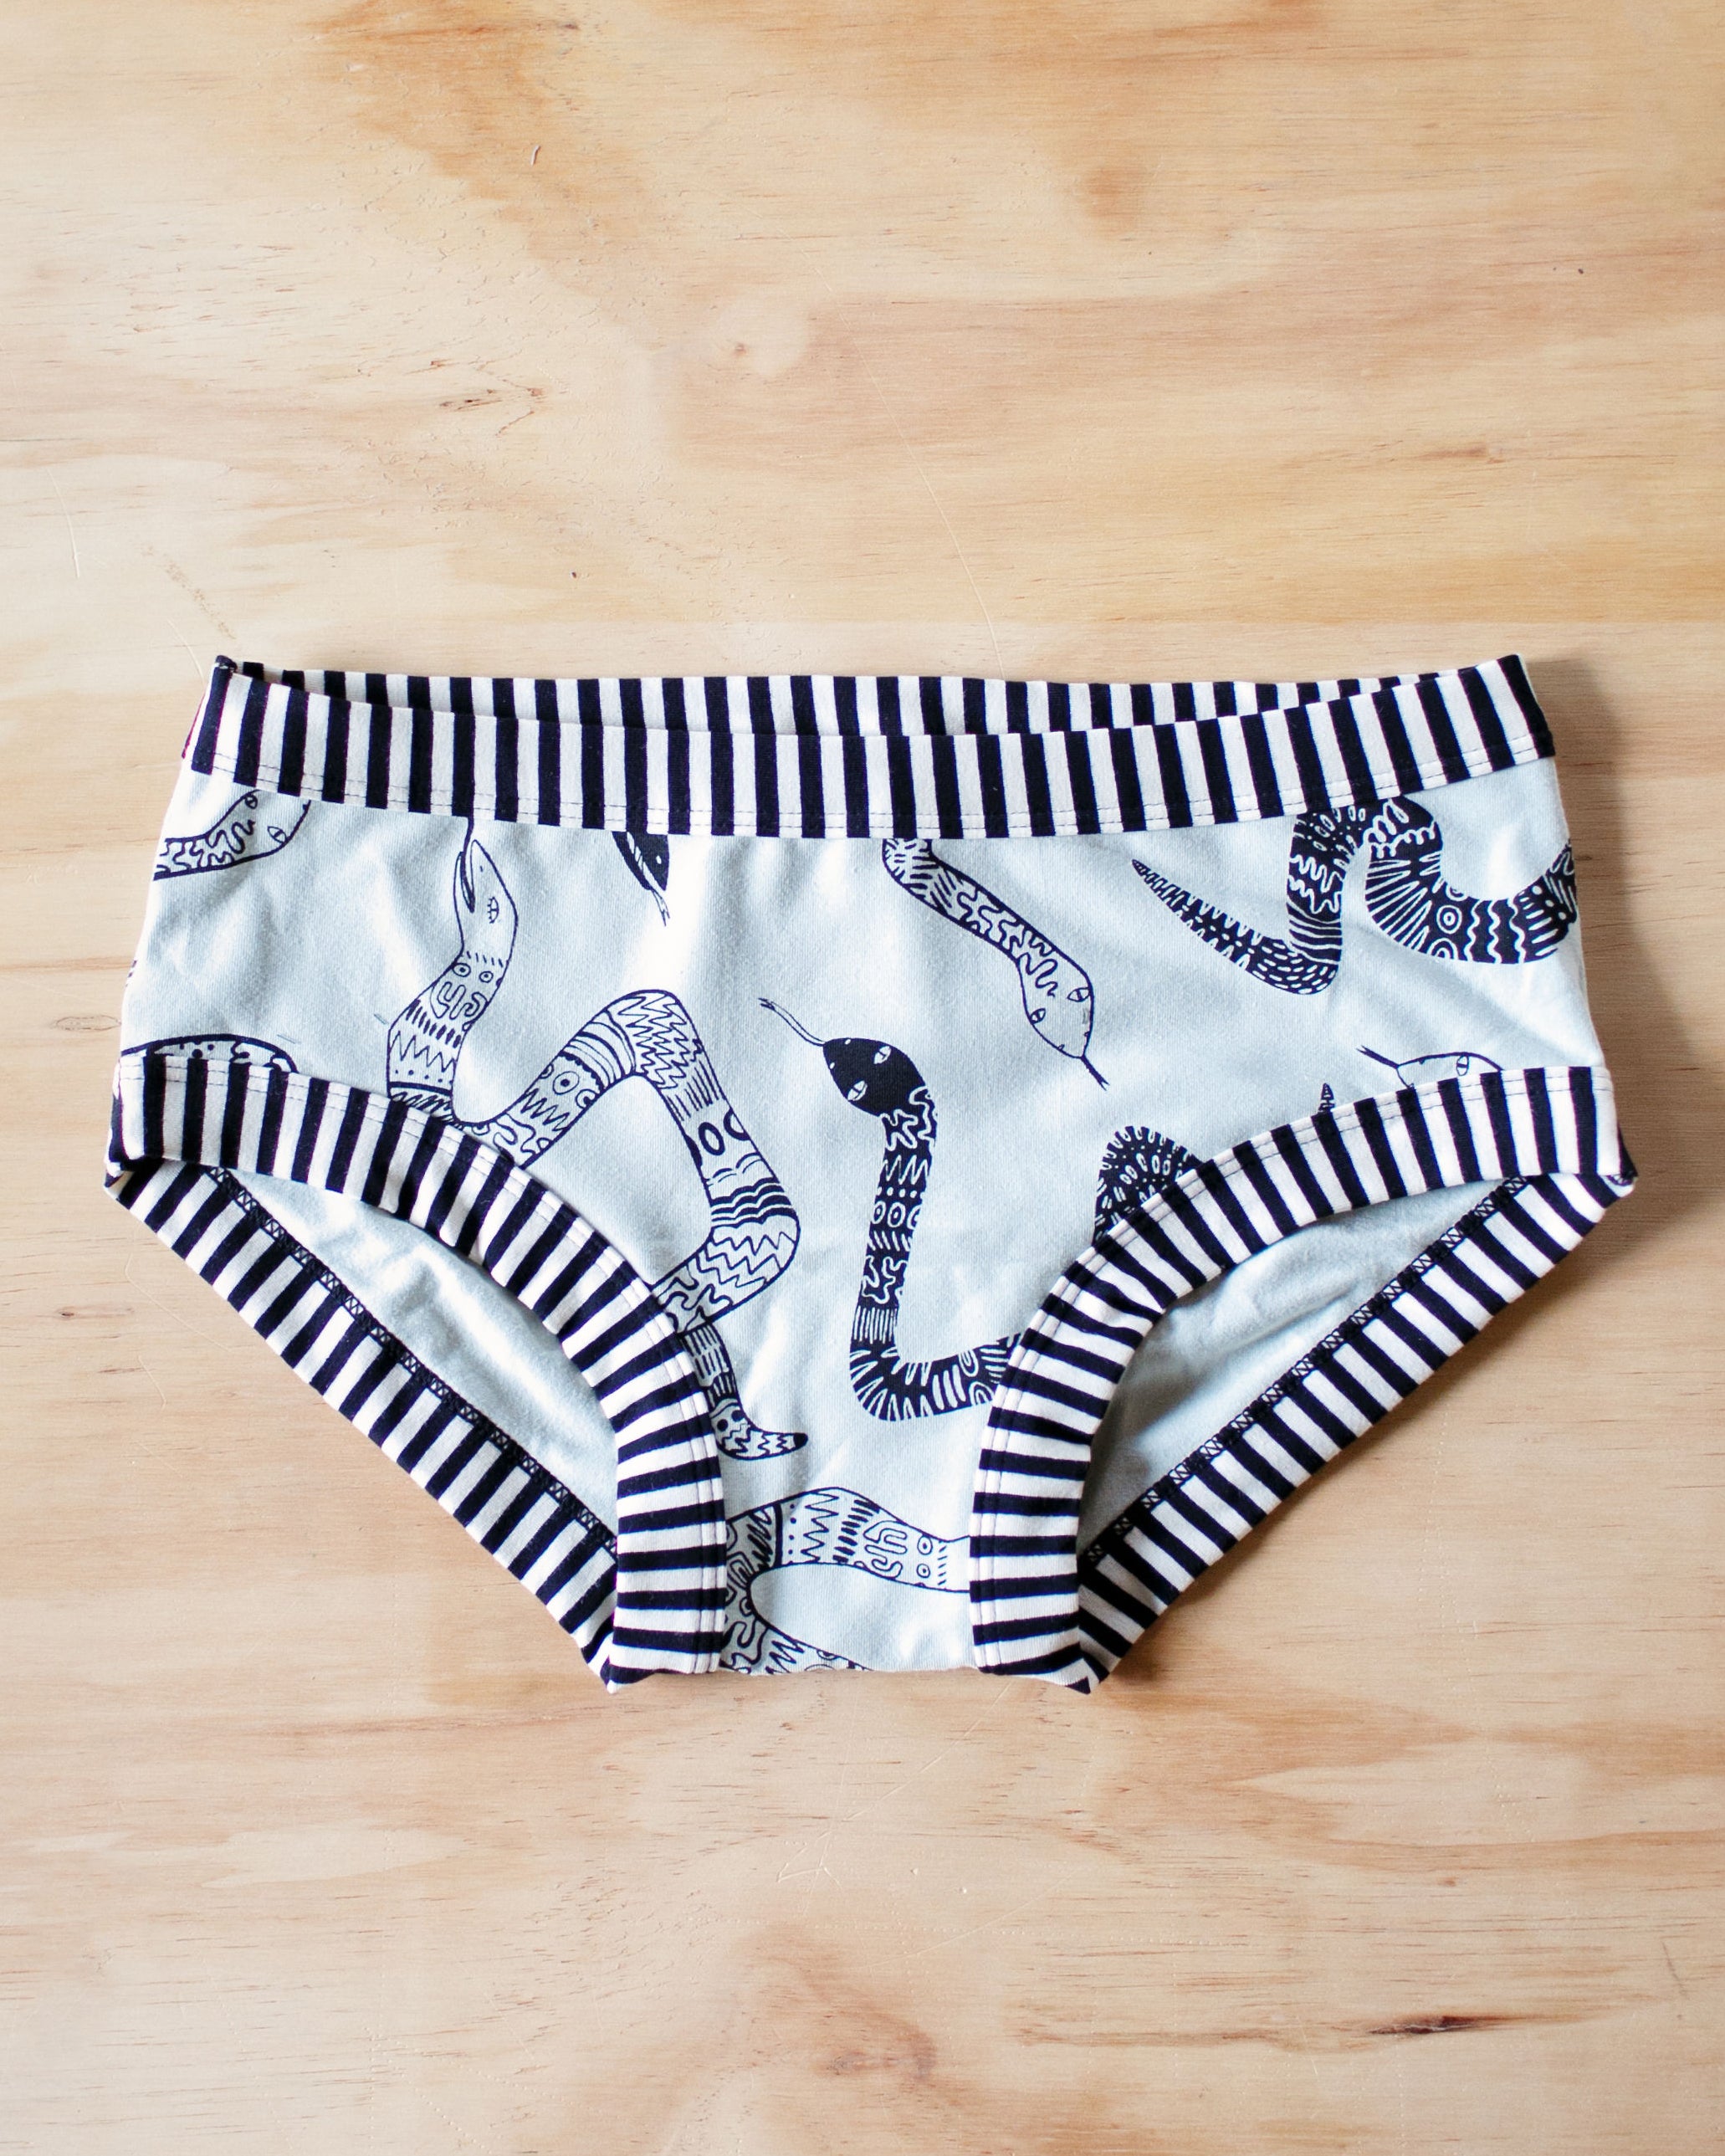 Flat lay of Thunderpants organic cotton Hipster style underwear in Sketchy Snakes: sage color with black sketched snakes and black and white stripe binding.